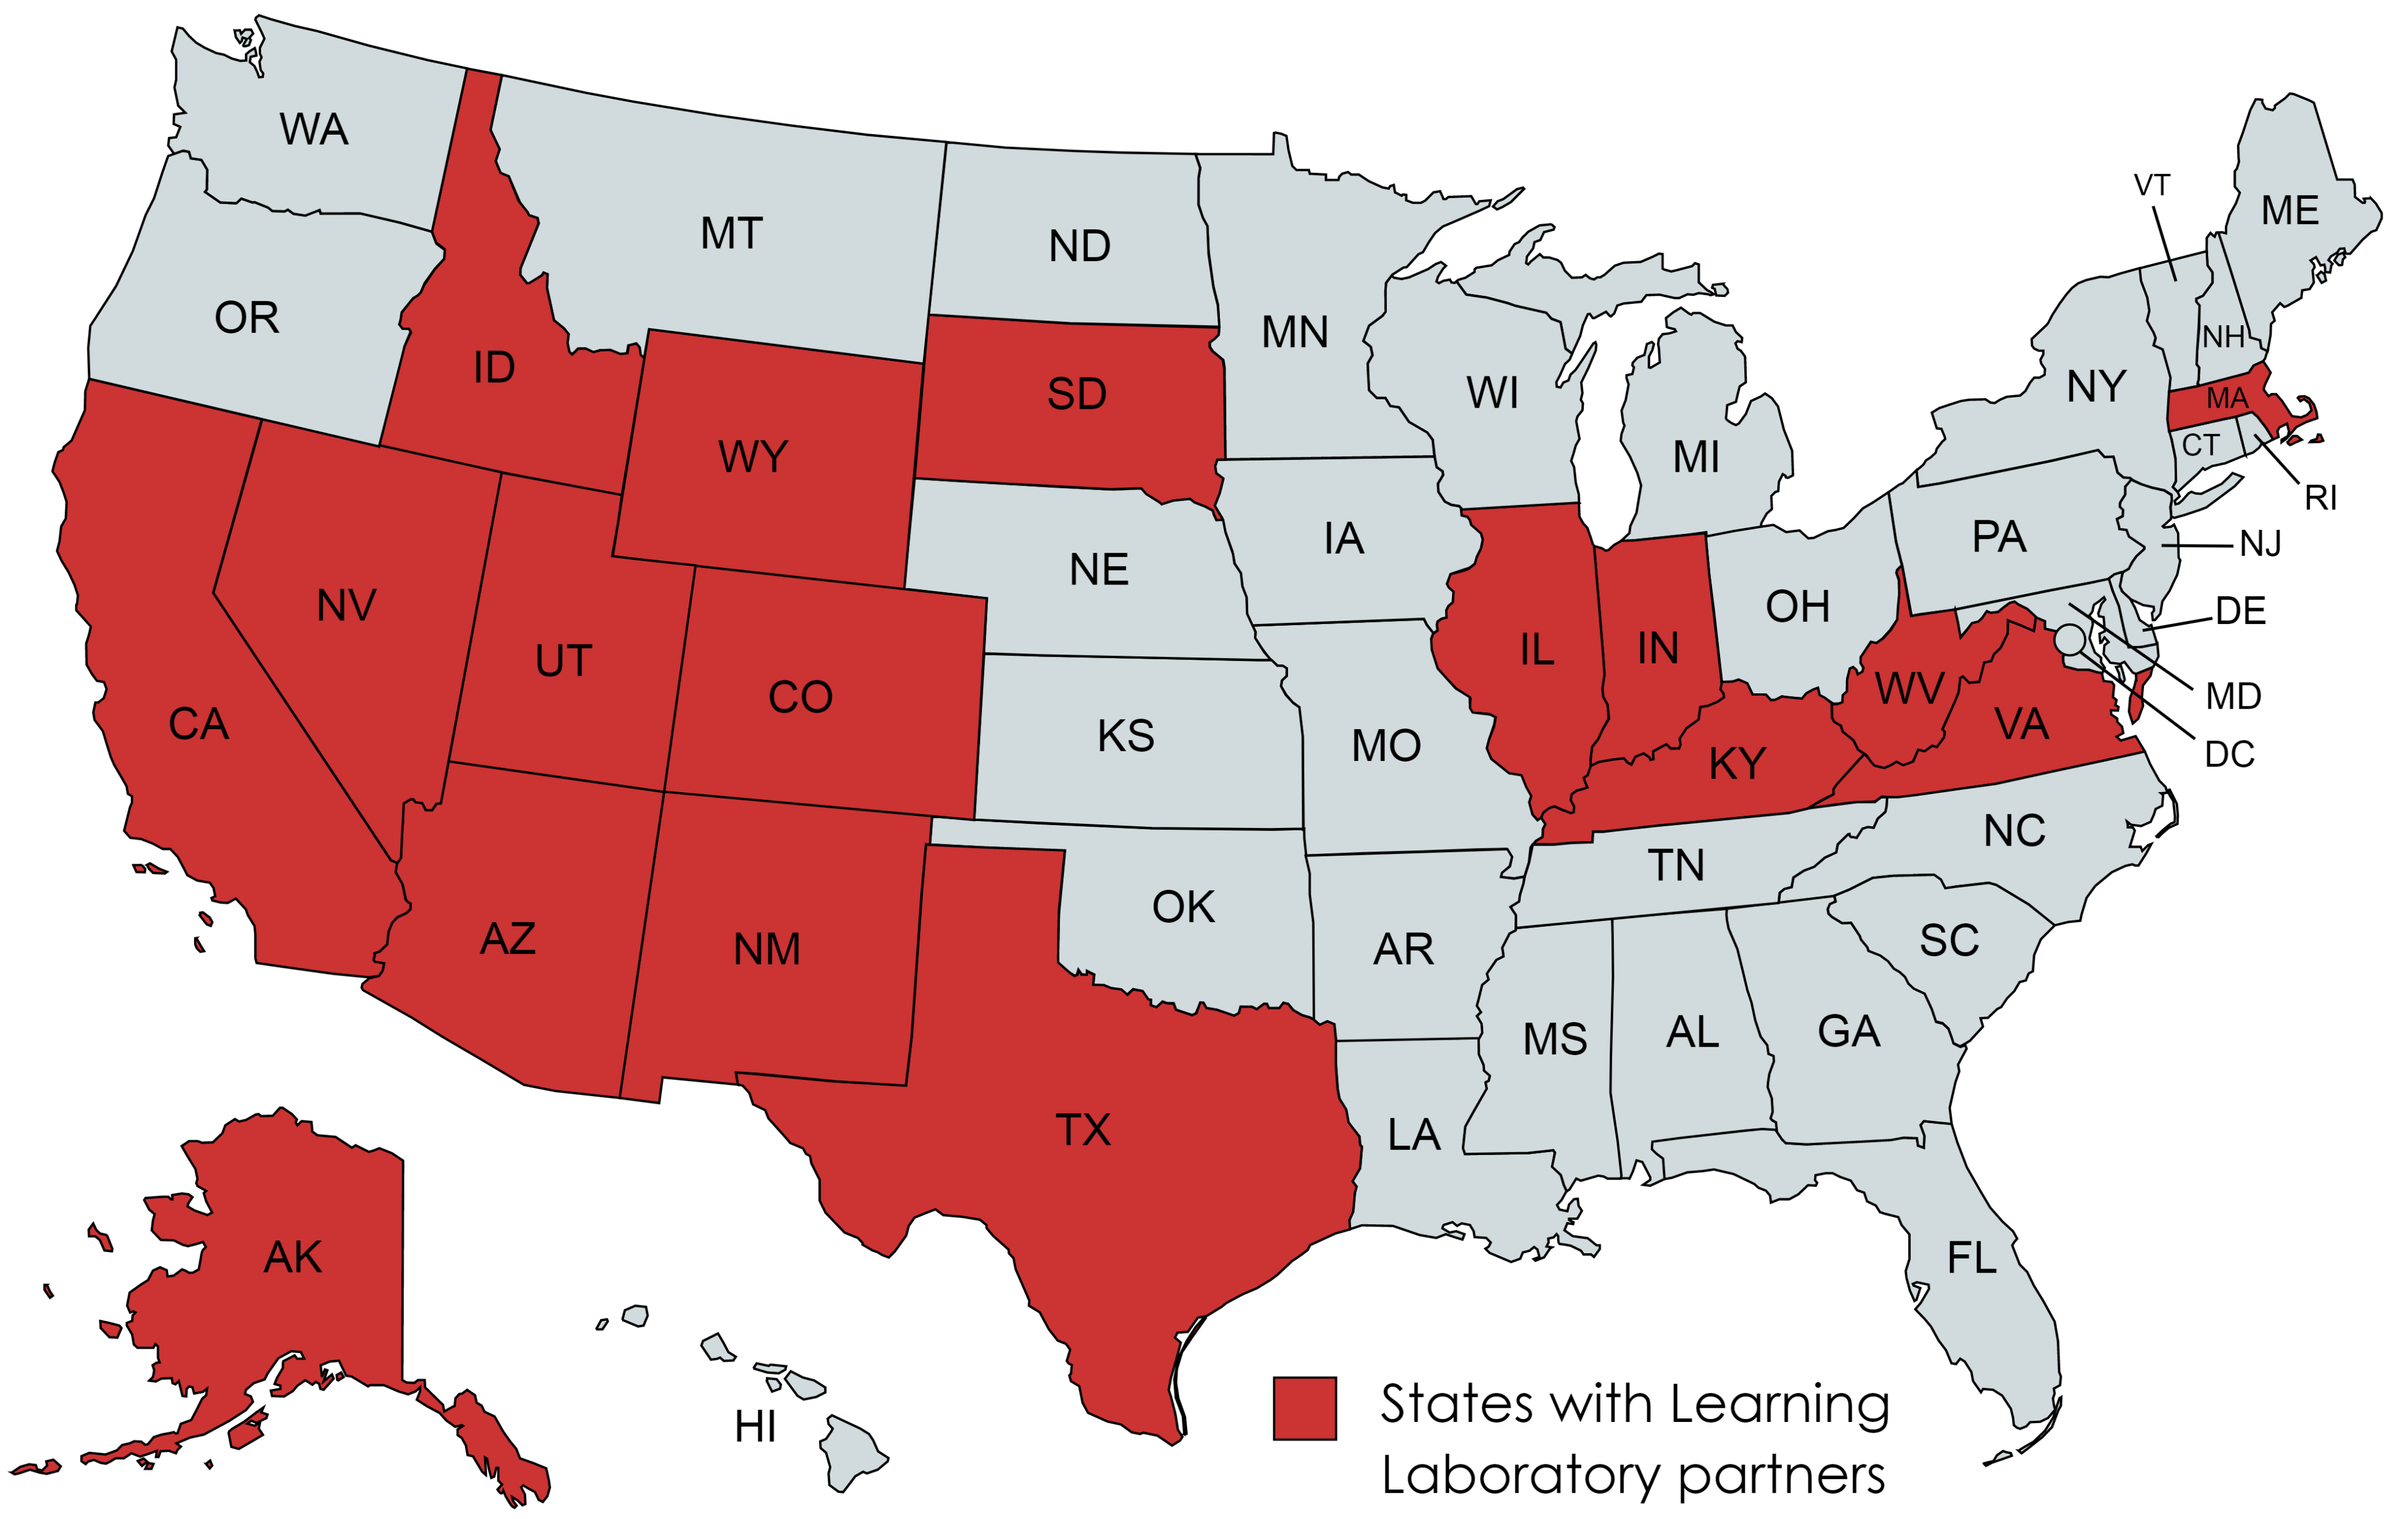 Map of U.S. with states represented by training partners highlighted in red.